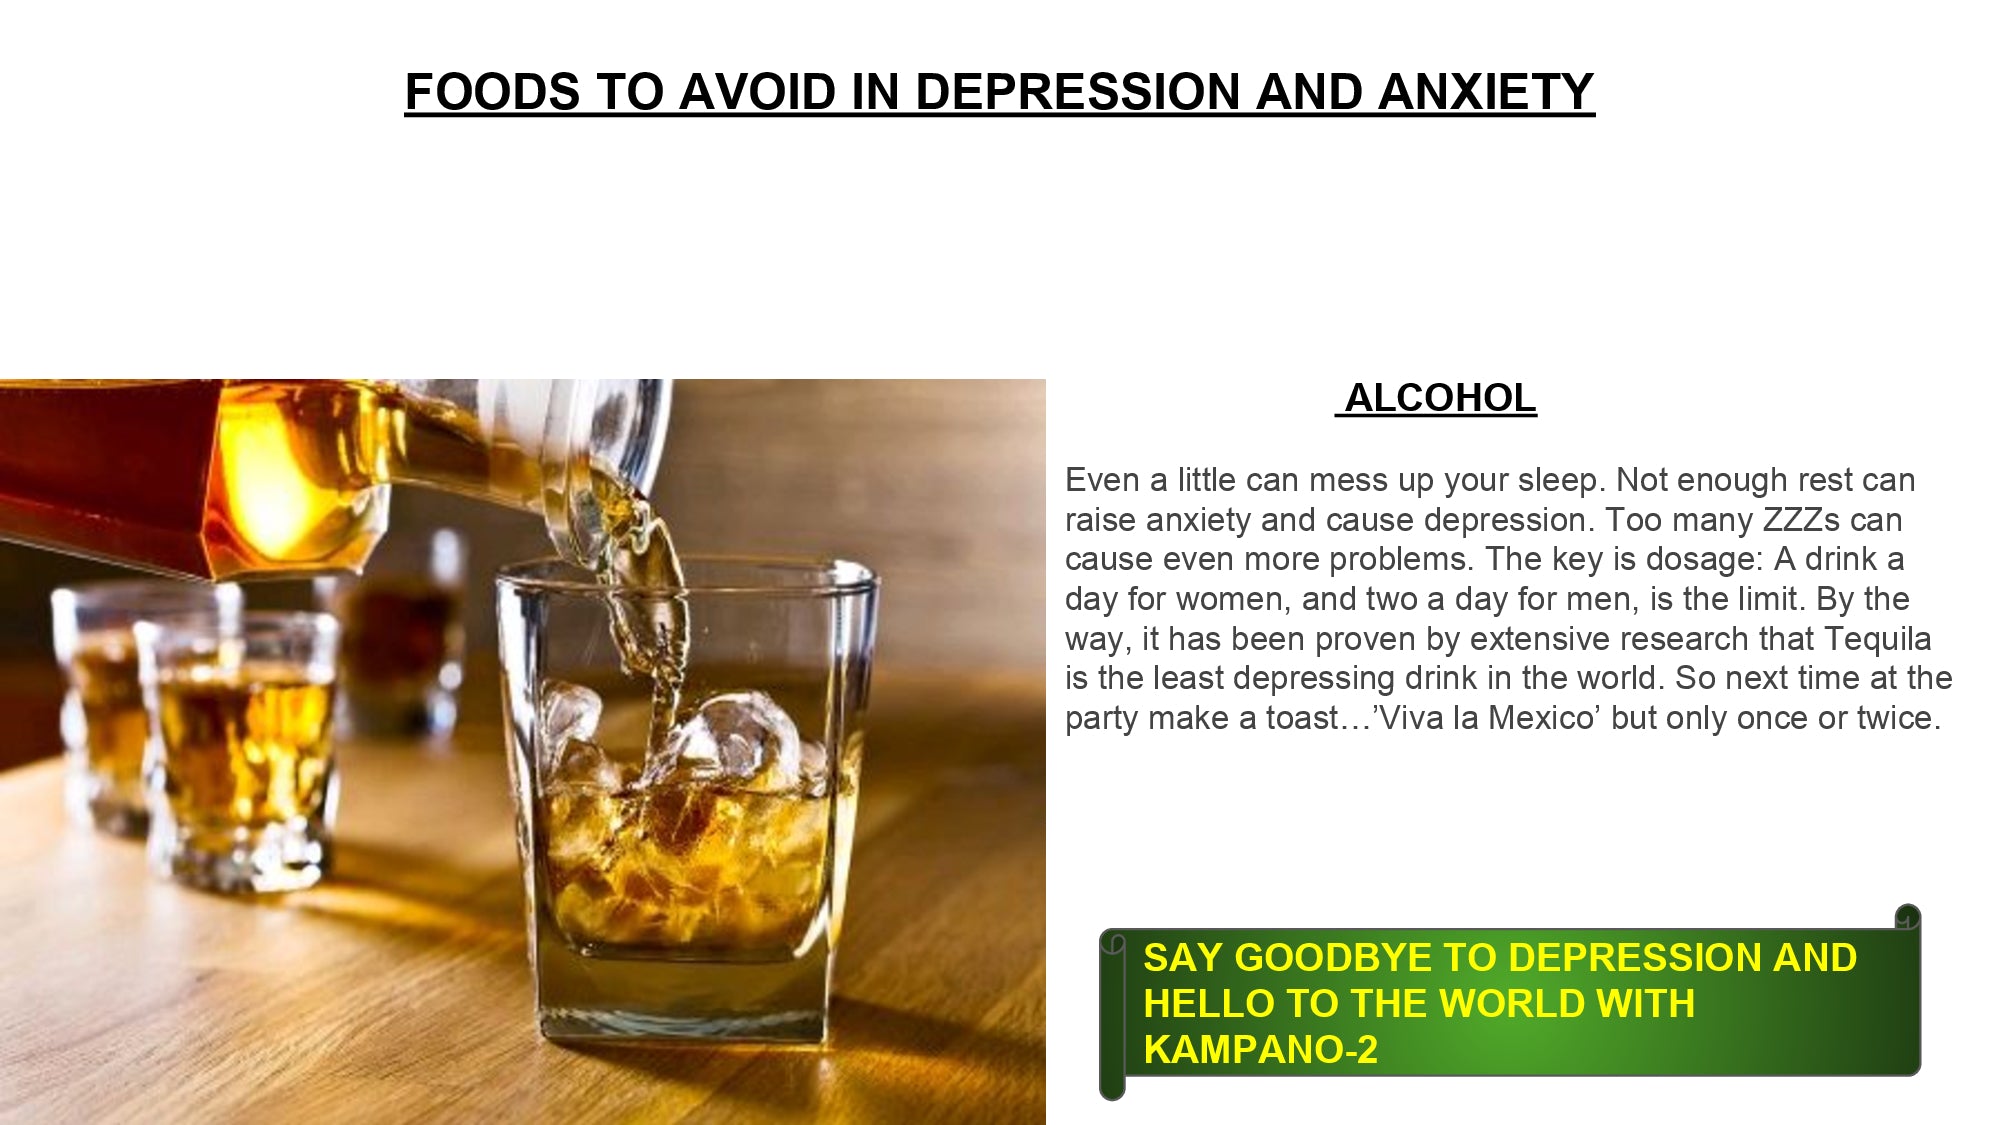 alcohol causes depression should be avoided